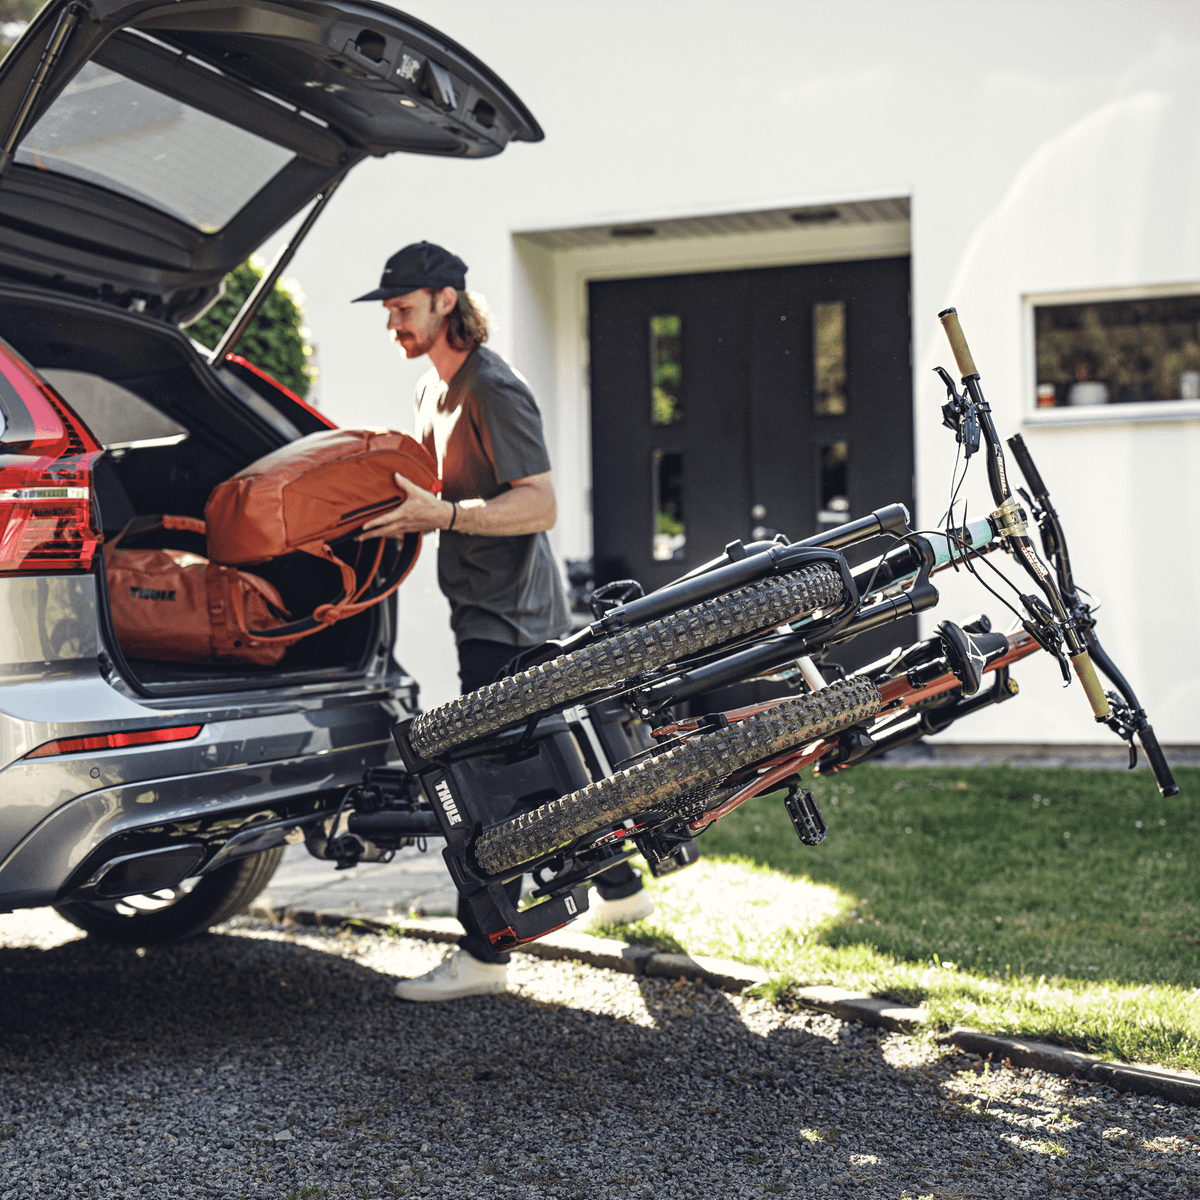 A man is loading bags in the trunk of his car, where a bike carrier is mounted on the towbar.